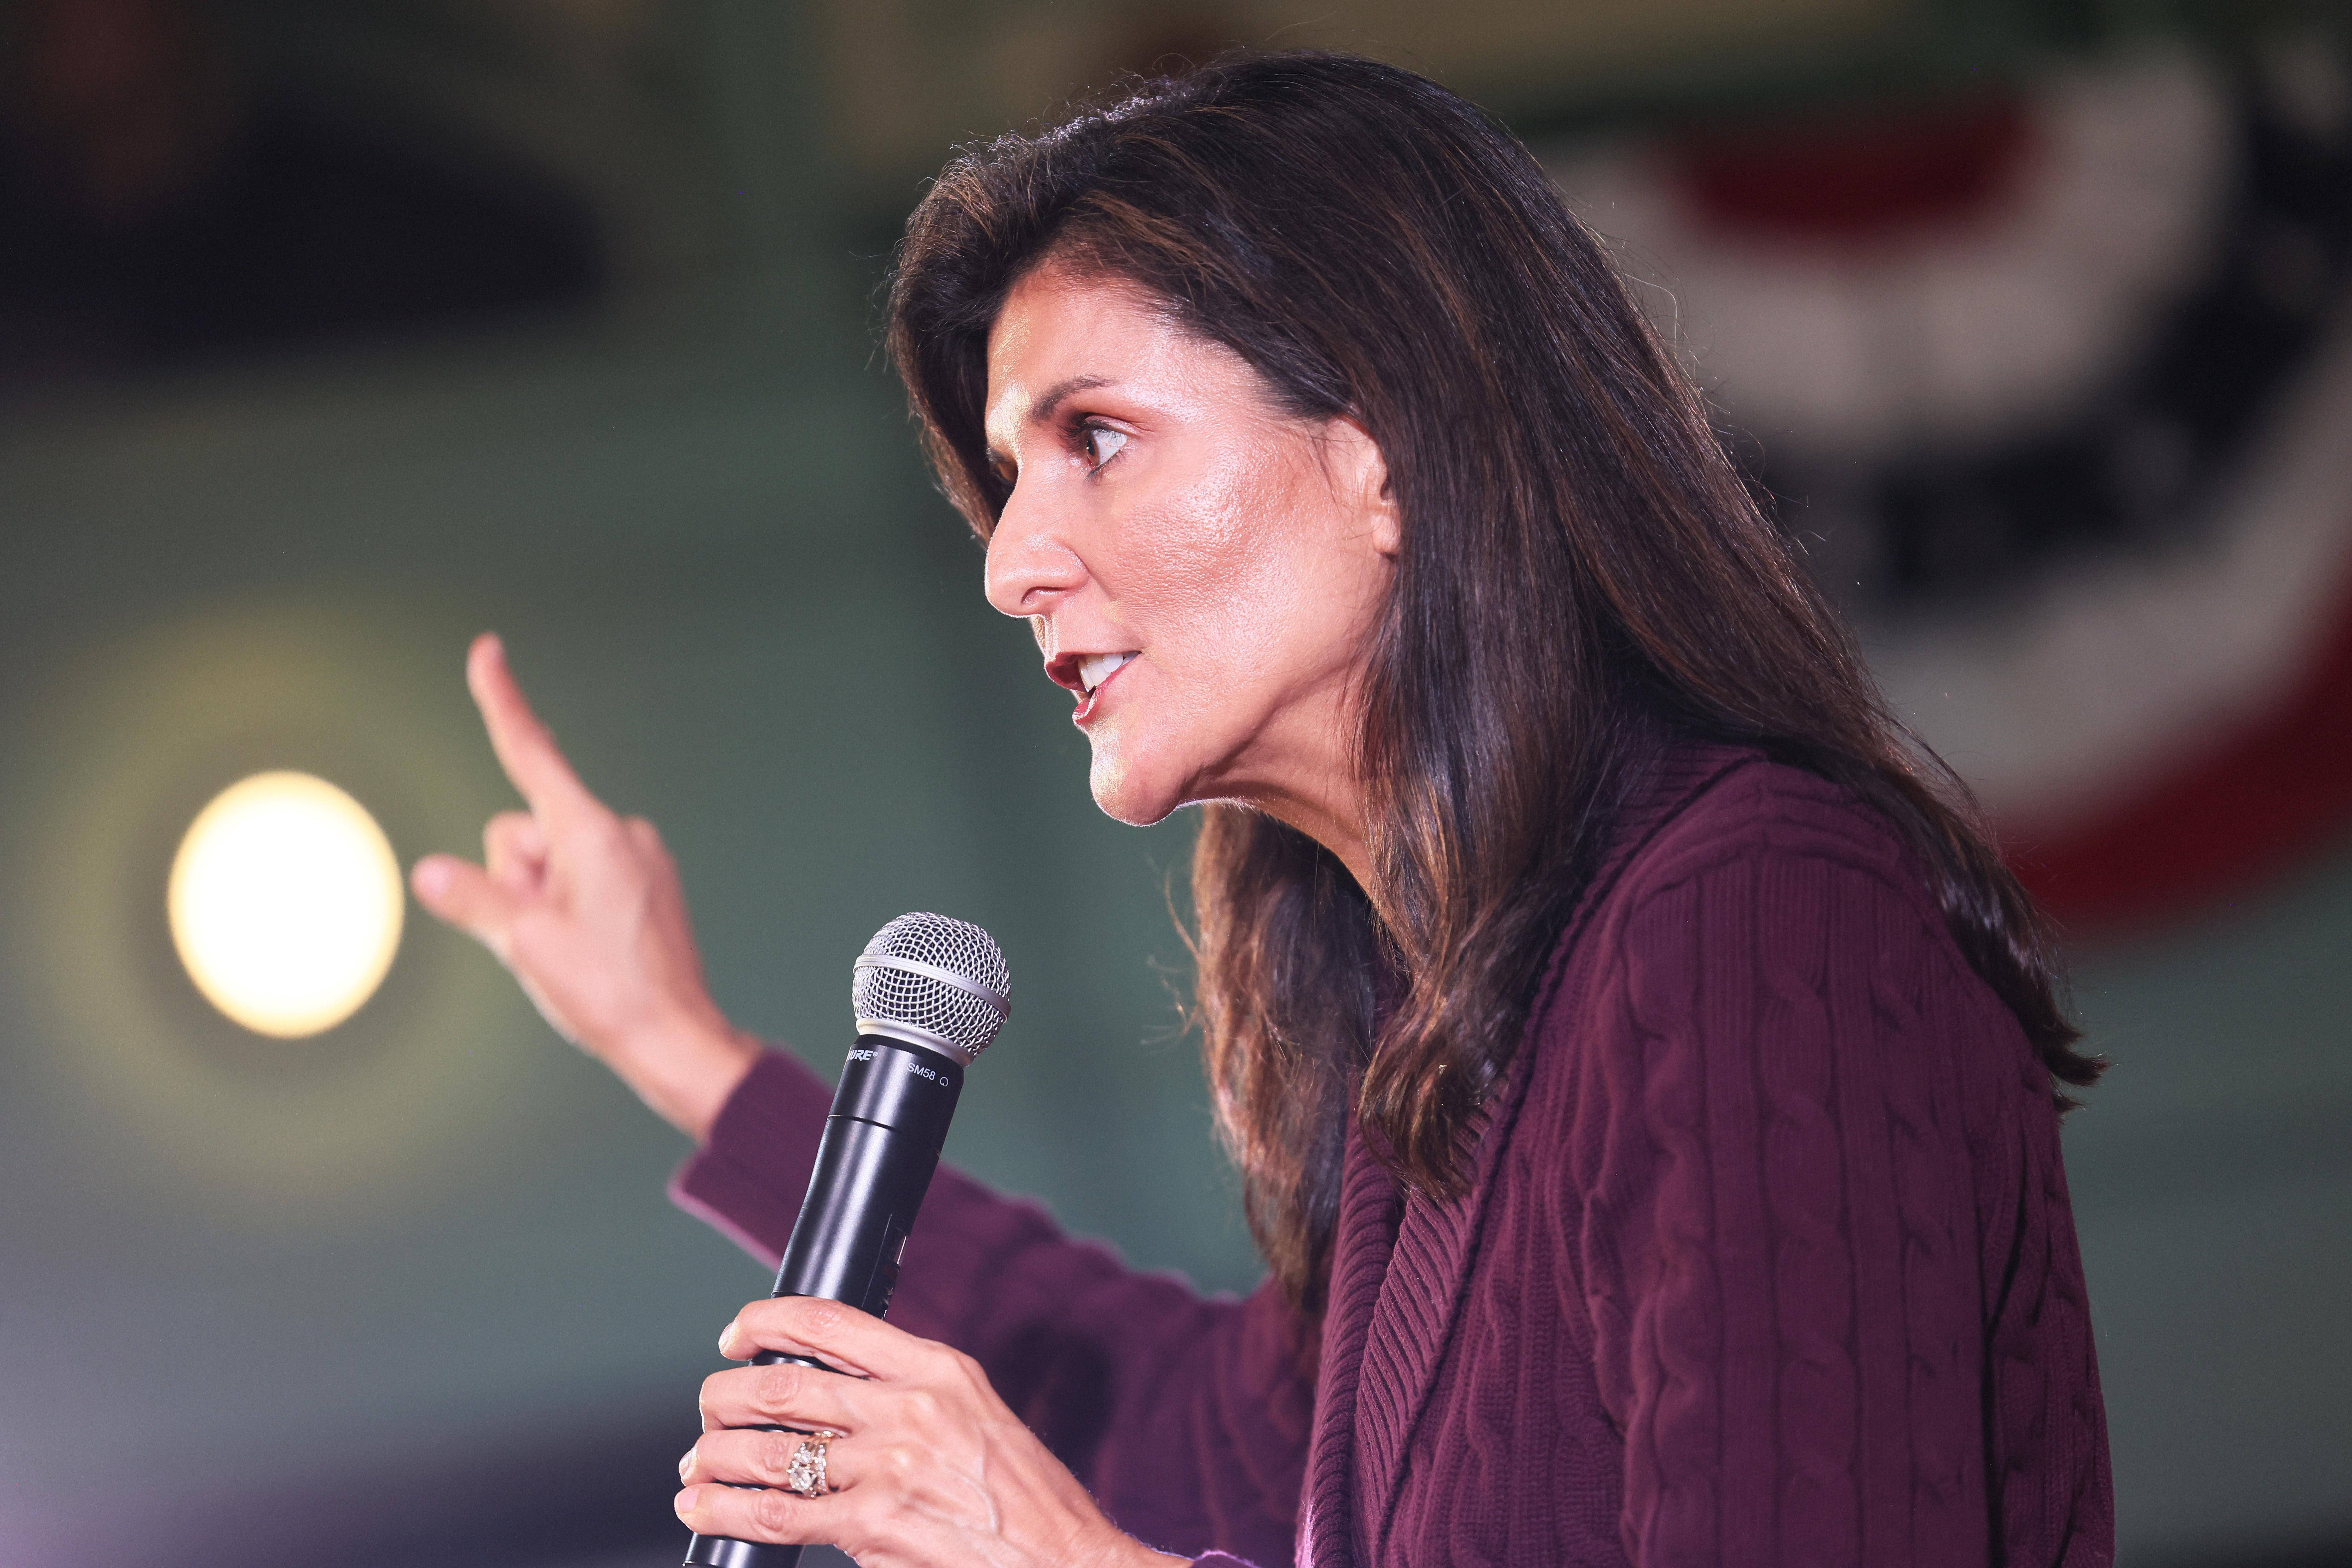 A close-up shot of Nikki Haley, wearing a purple sweater and holding a microphone in one hand.